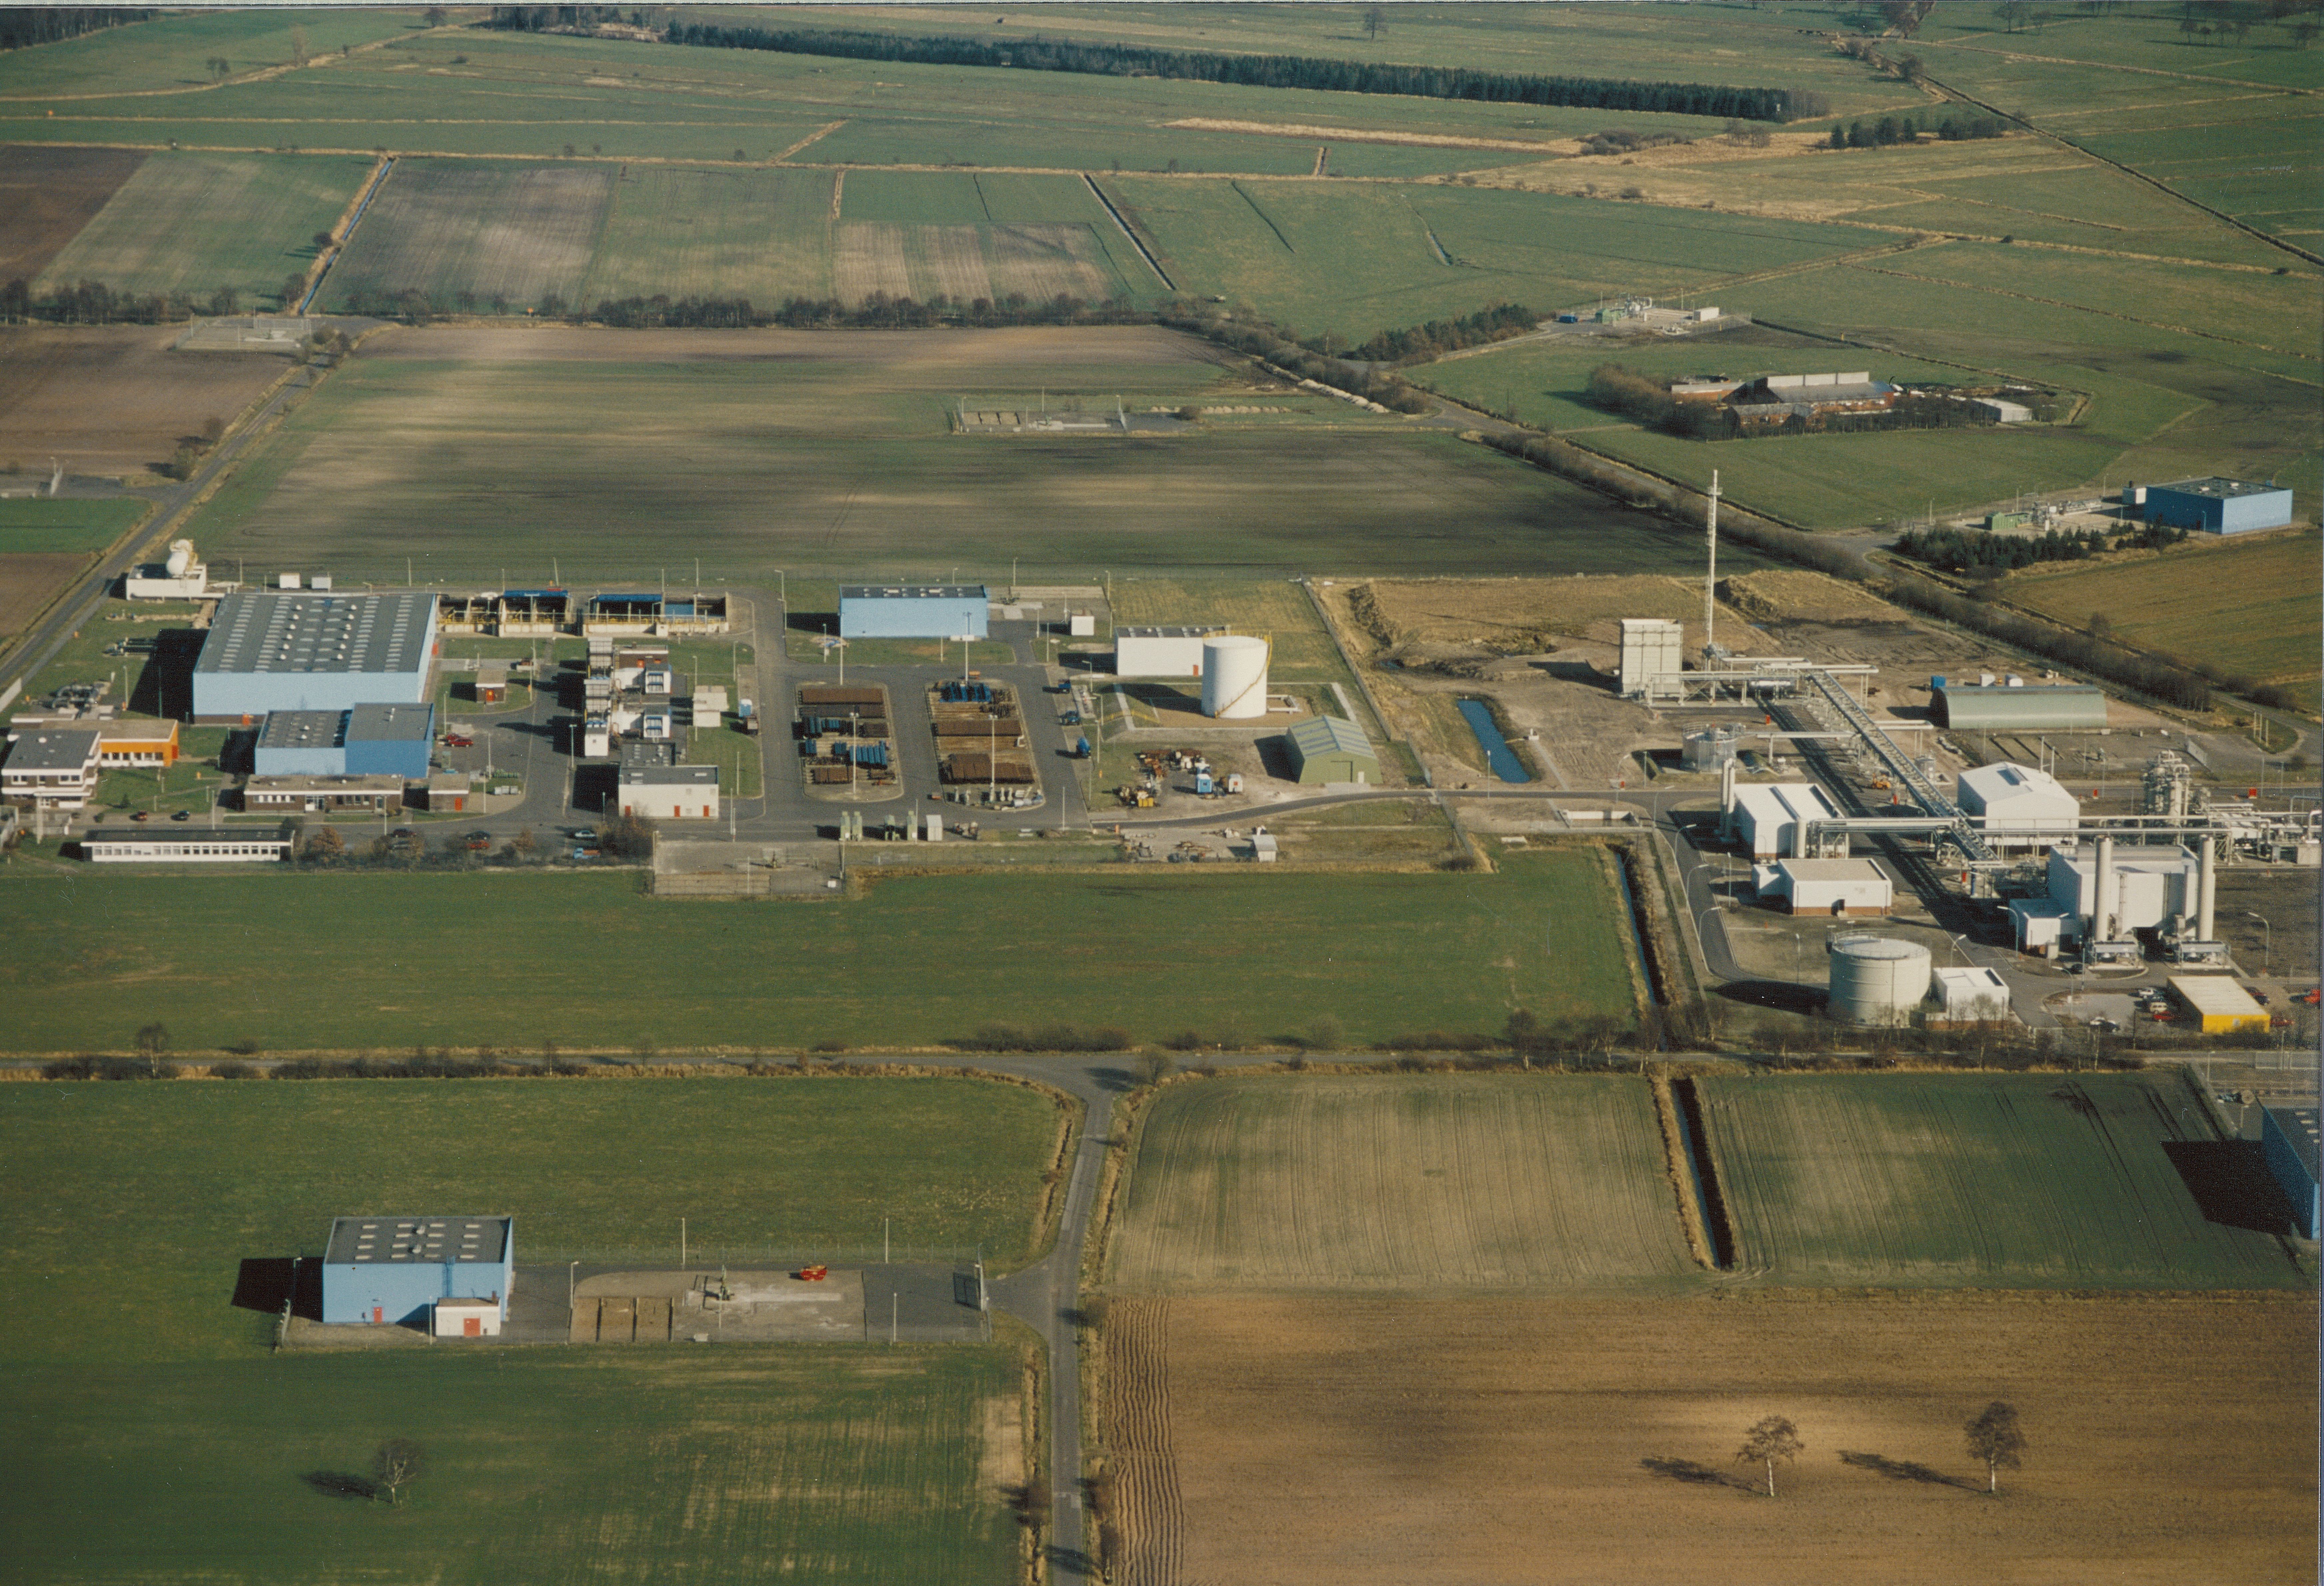 Aerial view of the cavern facility